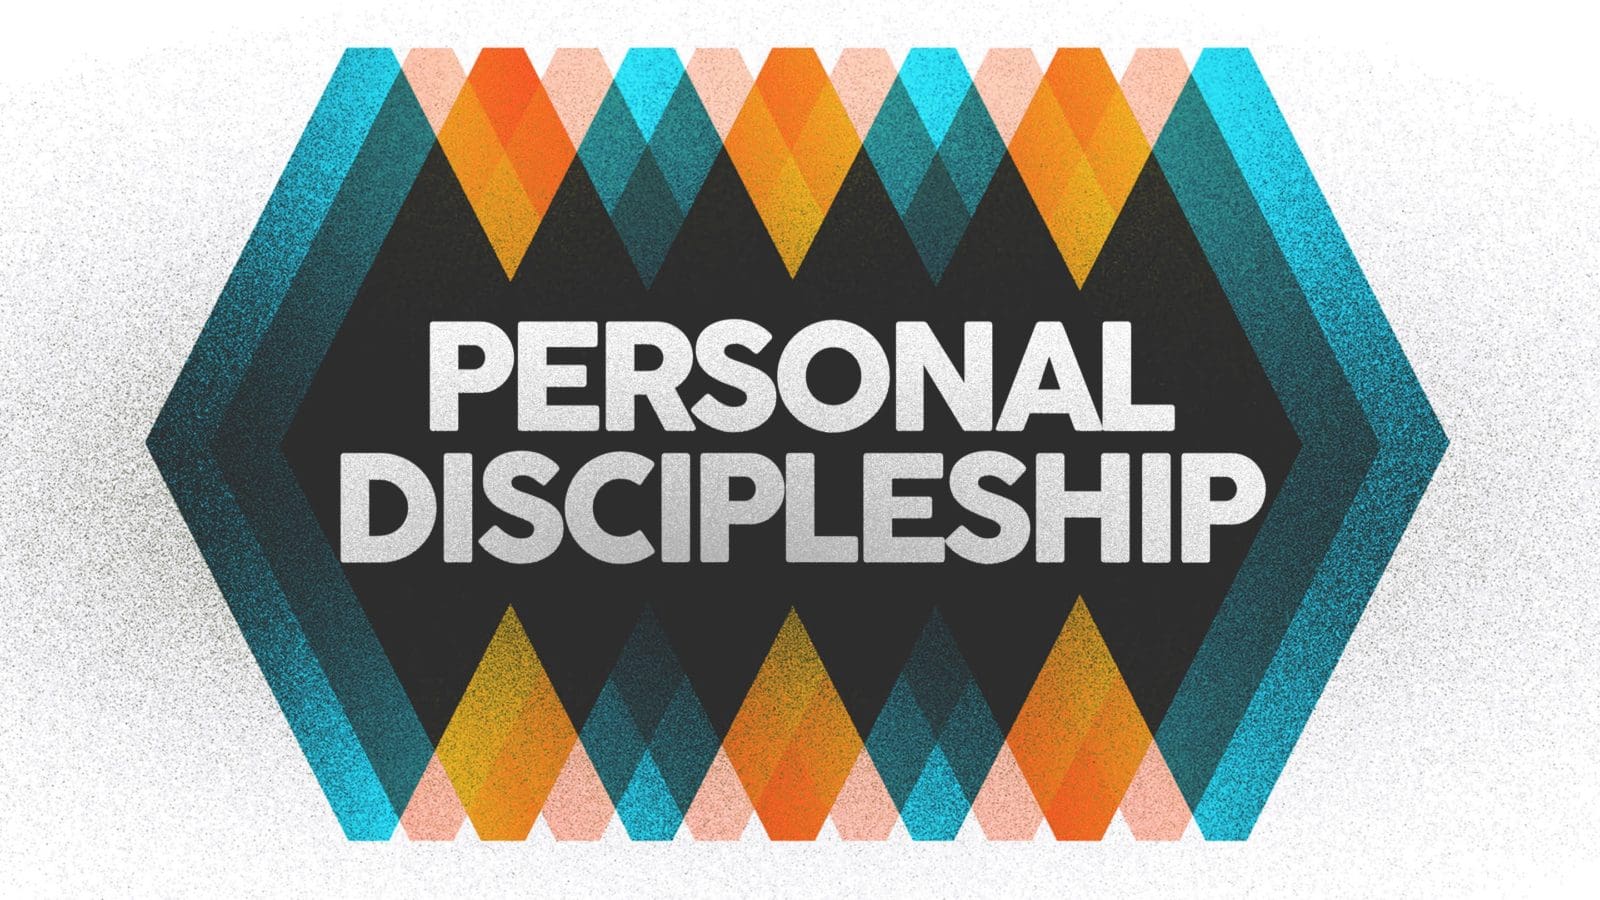 Personal Discipleship Course for Spring 2018